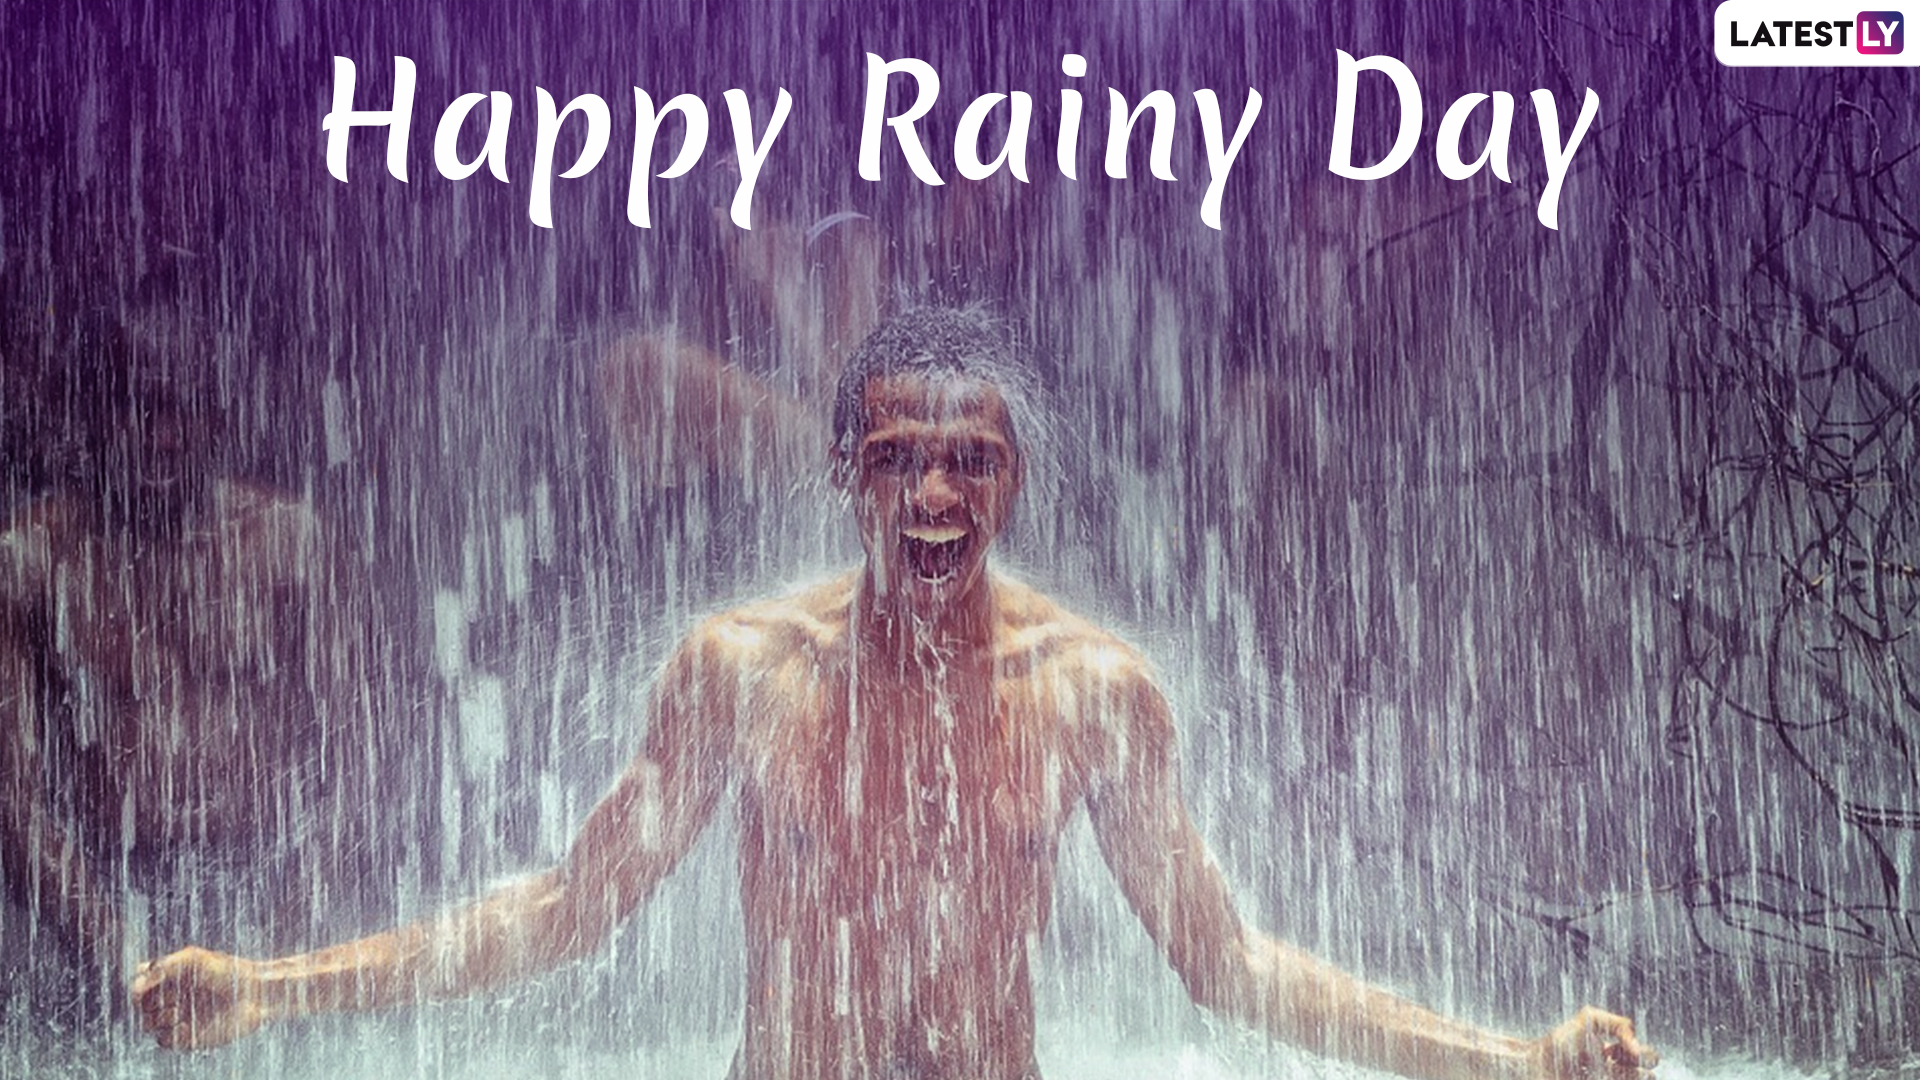 Happy Monsoon 2022 Images & Rainy Day HD Wallpapers for Free Download  Online: Quotes, GIF Greetings, WhatsApp Messages and Facebook Status | 🙏🏻  LatestLY